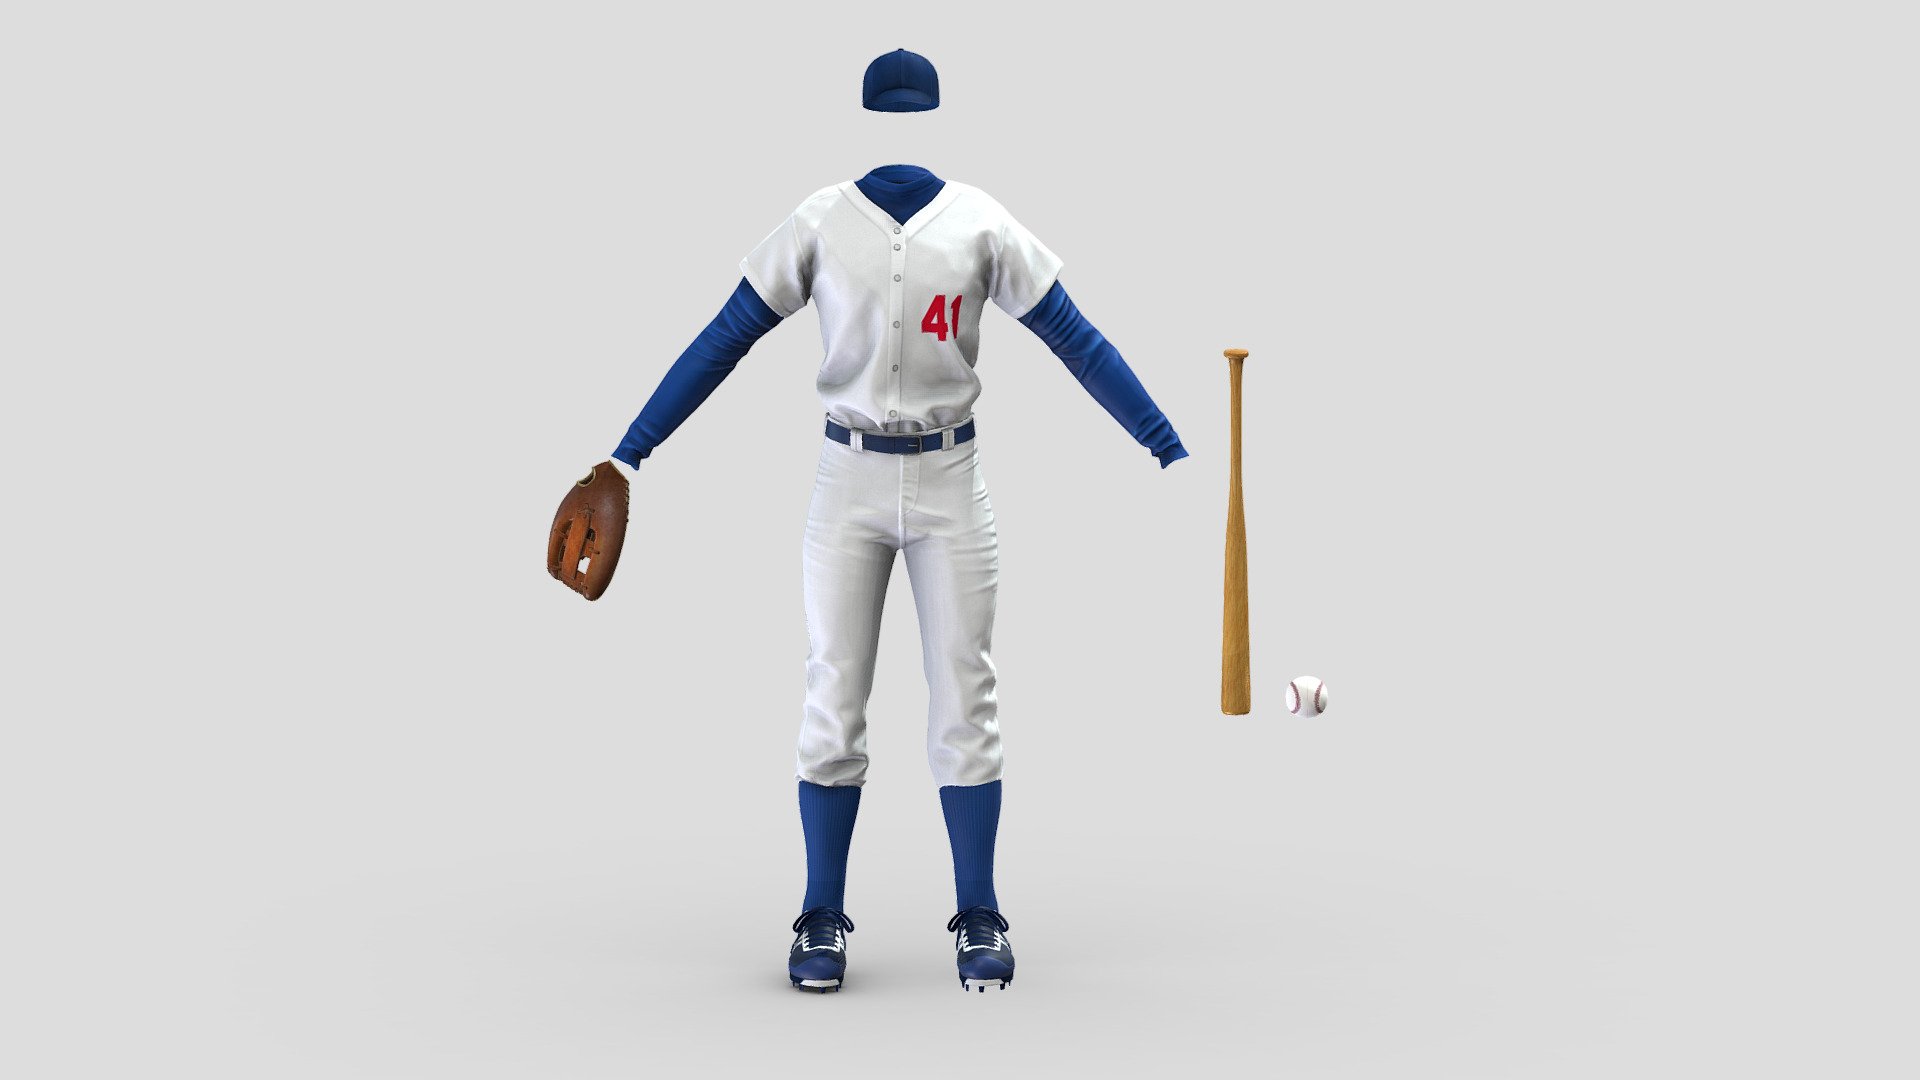 Hat, Uniform, Ball, Bat, Shoes, Gloves are separate objects (can be used separately)

Can fit to any character, ready for games

Quads, clean topology

No overlapping unwrapped UVs

High quality realistic textues : baked albedo, specular, normals, ao

FBX, OBJ, gITF, USDZ (request other formats)

PBR or Classic

Please ask for any other questions

Type     user:3dia &ldquo;search term